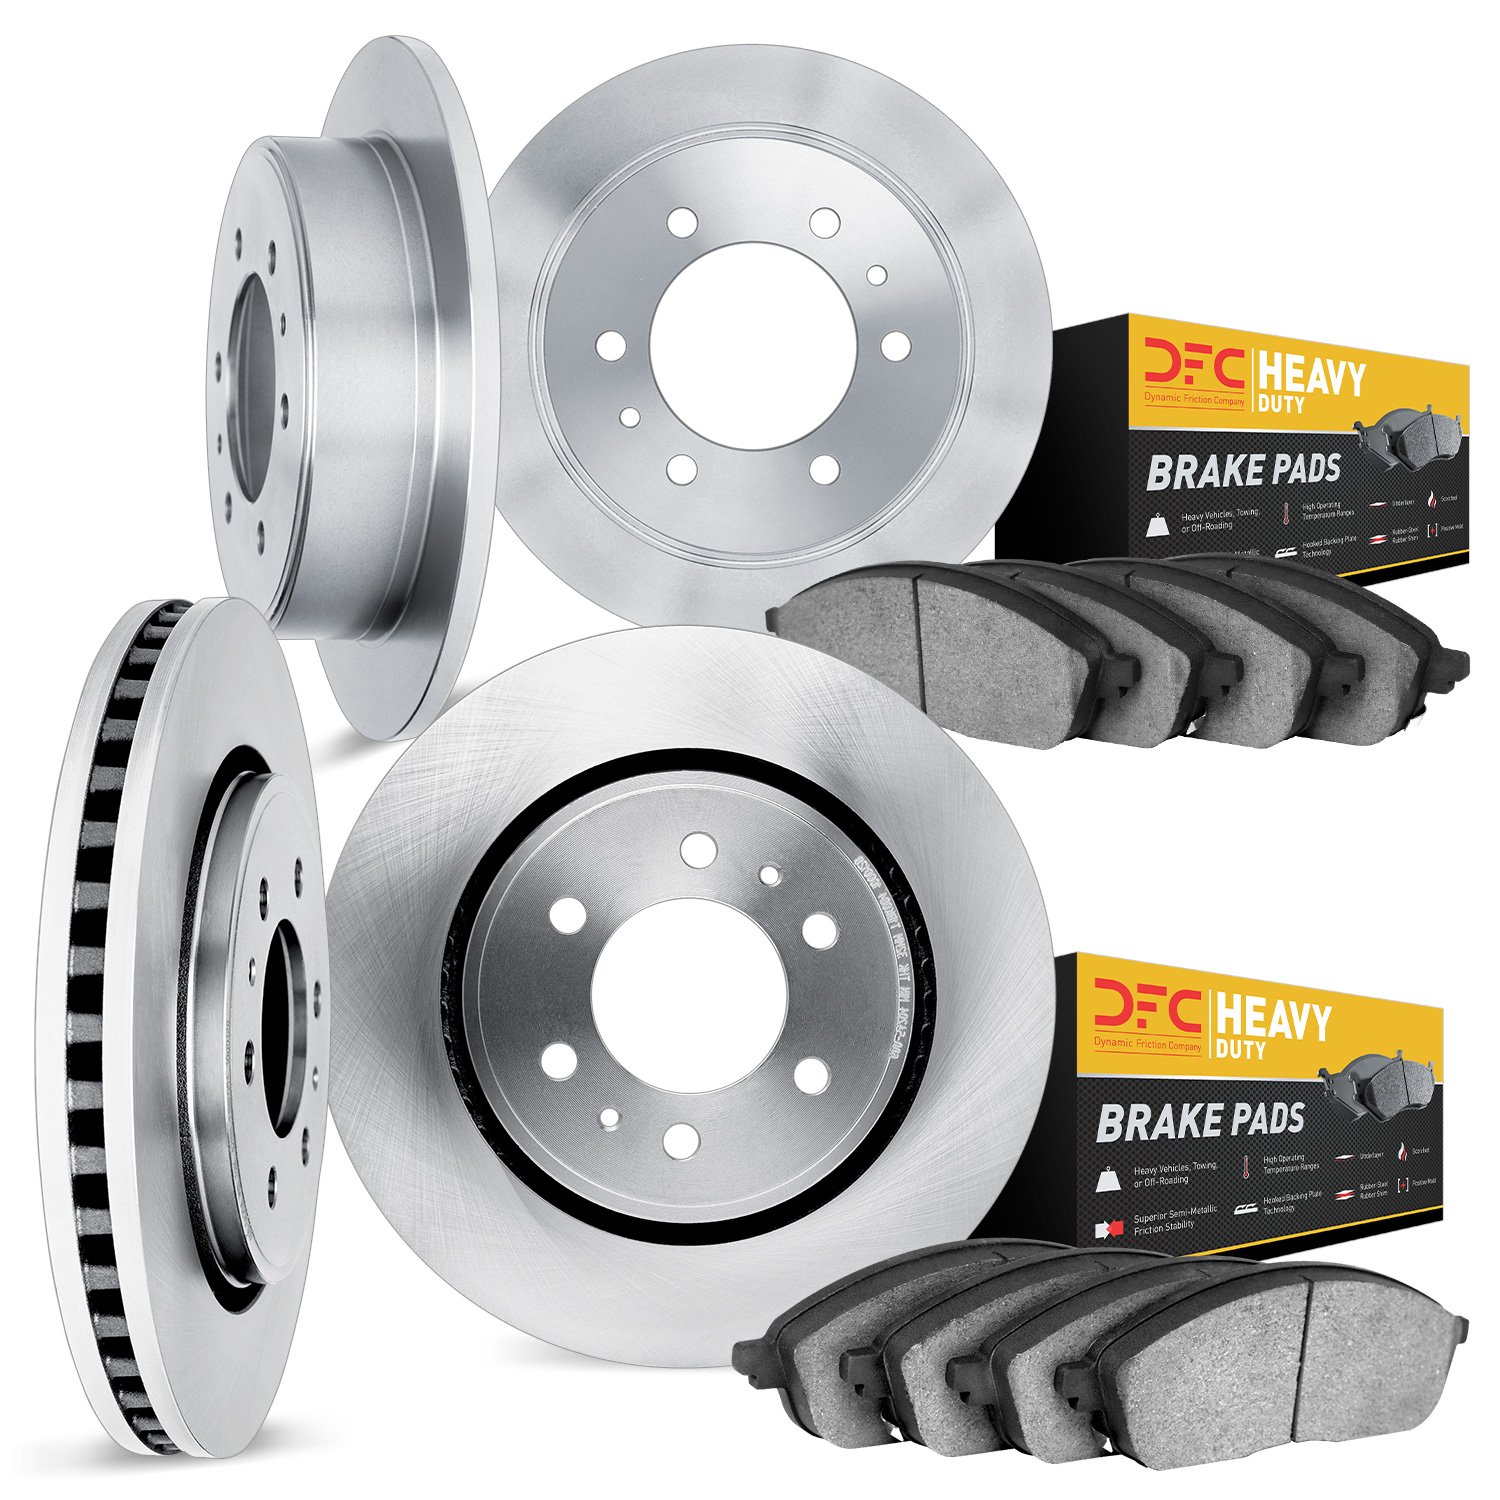 6204-40656 Brake Rotors w/Heavy-Duty Brake Pads Kit, Fits Select Multiple Makes/Models, Position: Front and Rear